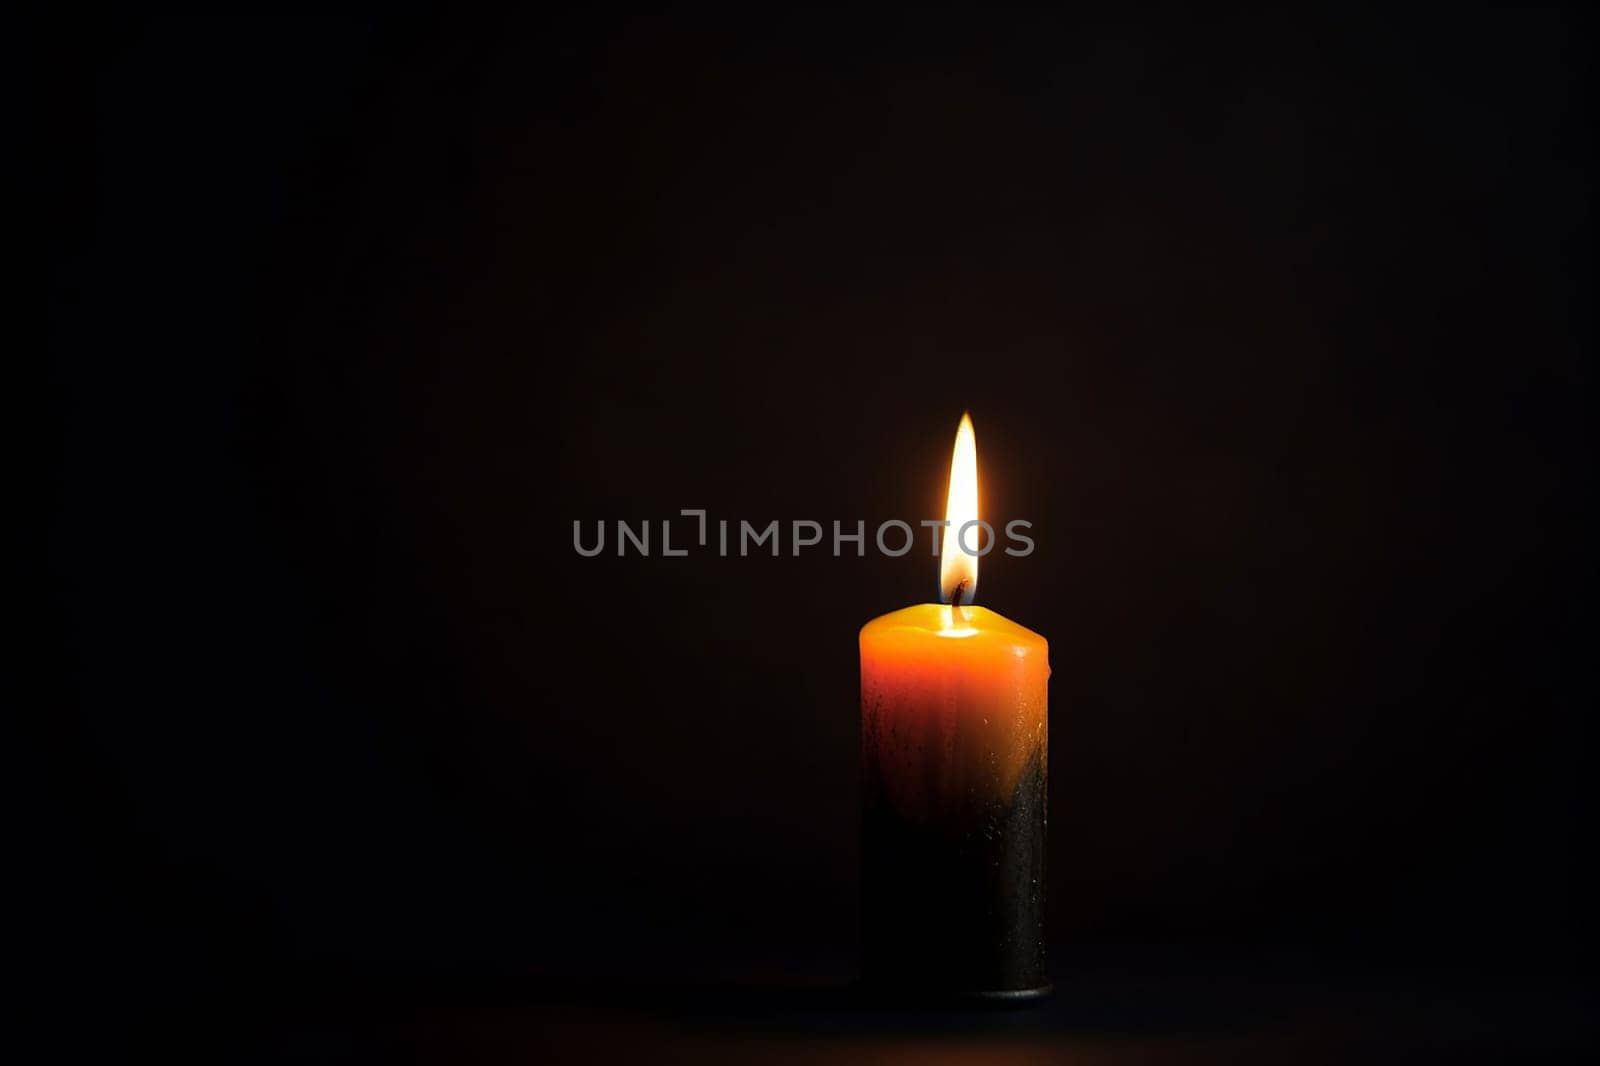 A lone lit candle against a dark background.